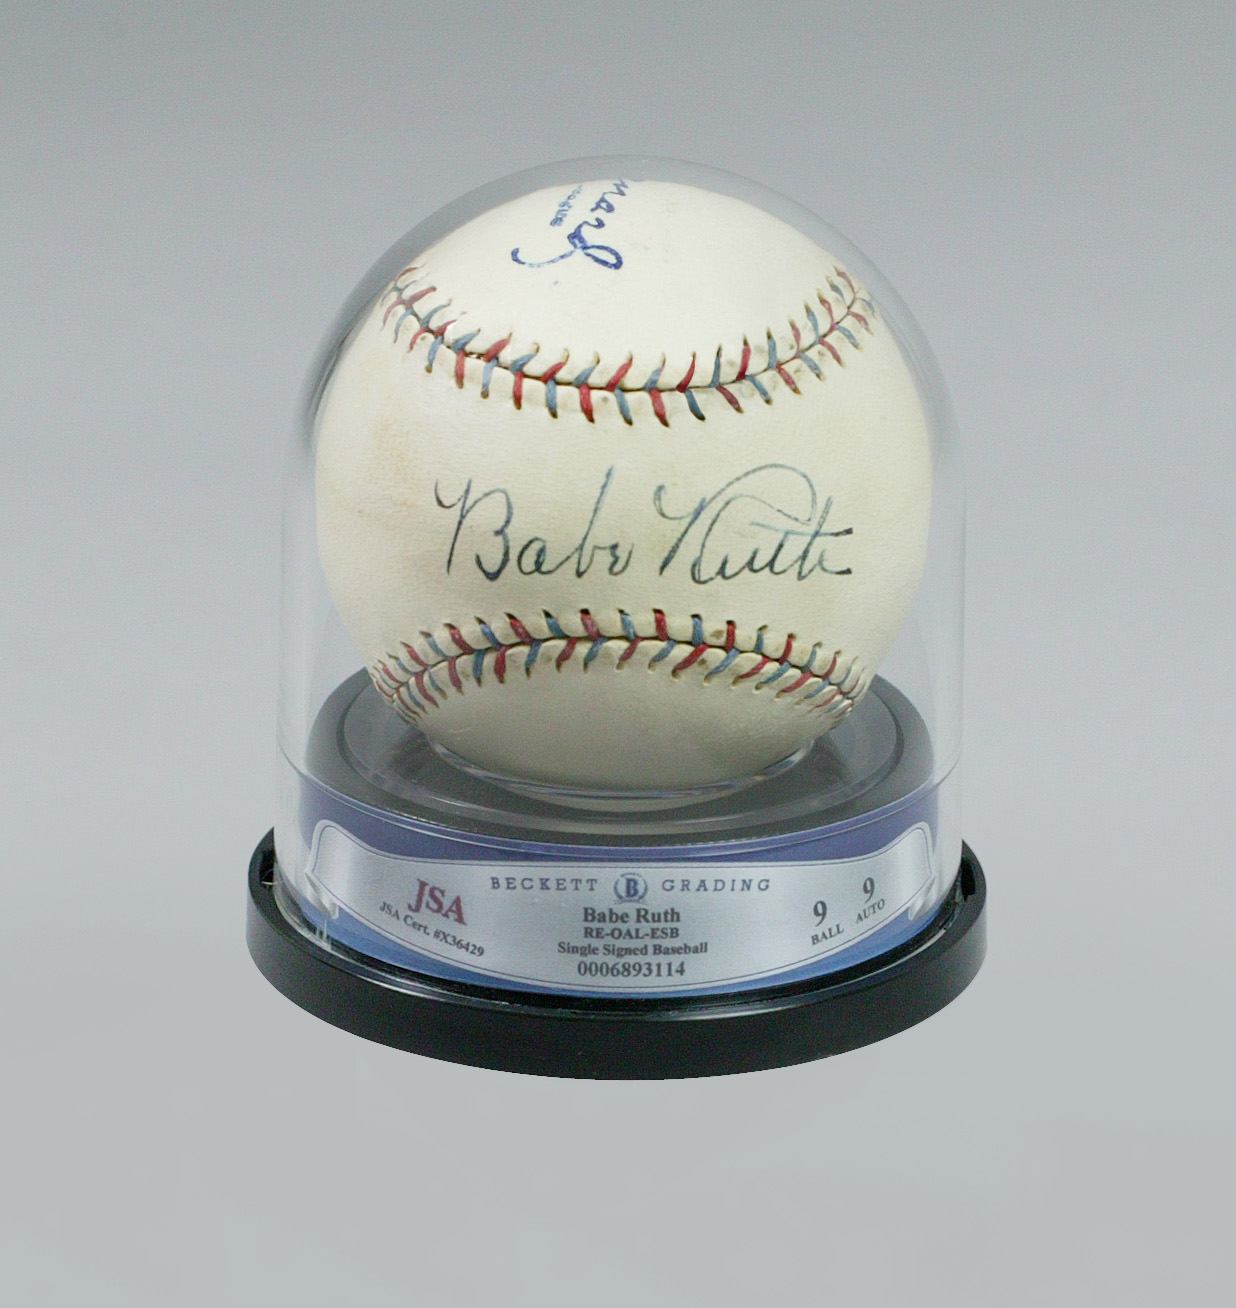 Beckett Grading and James Spence now autographed baseballs -